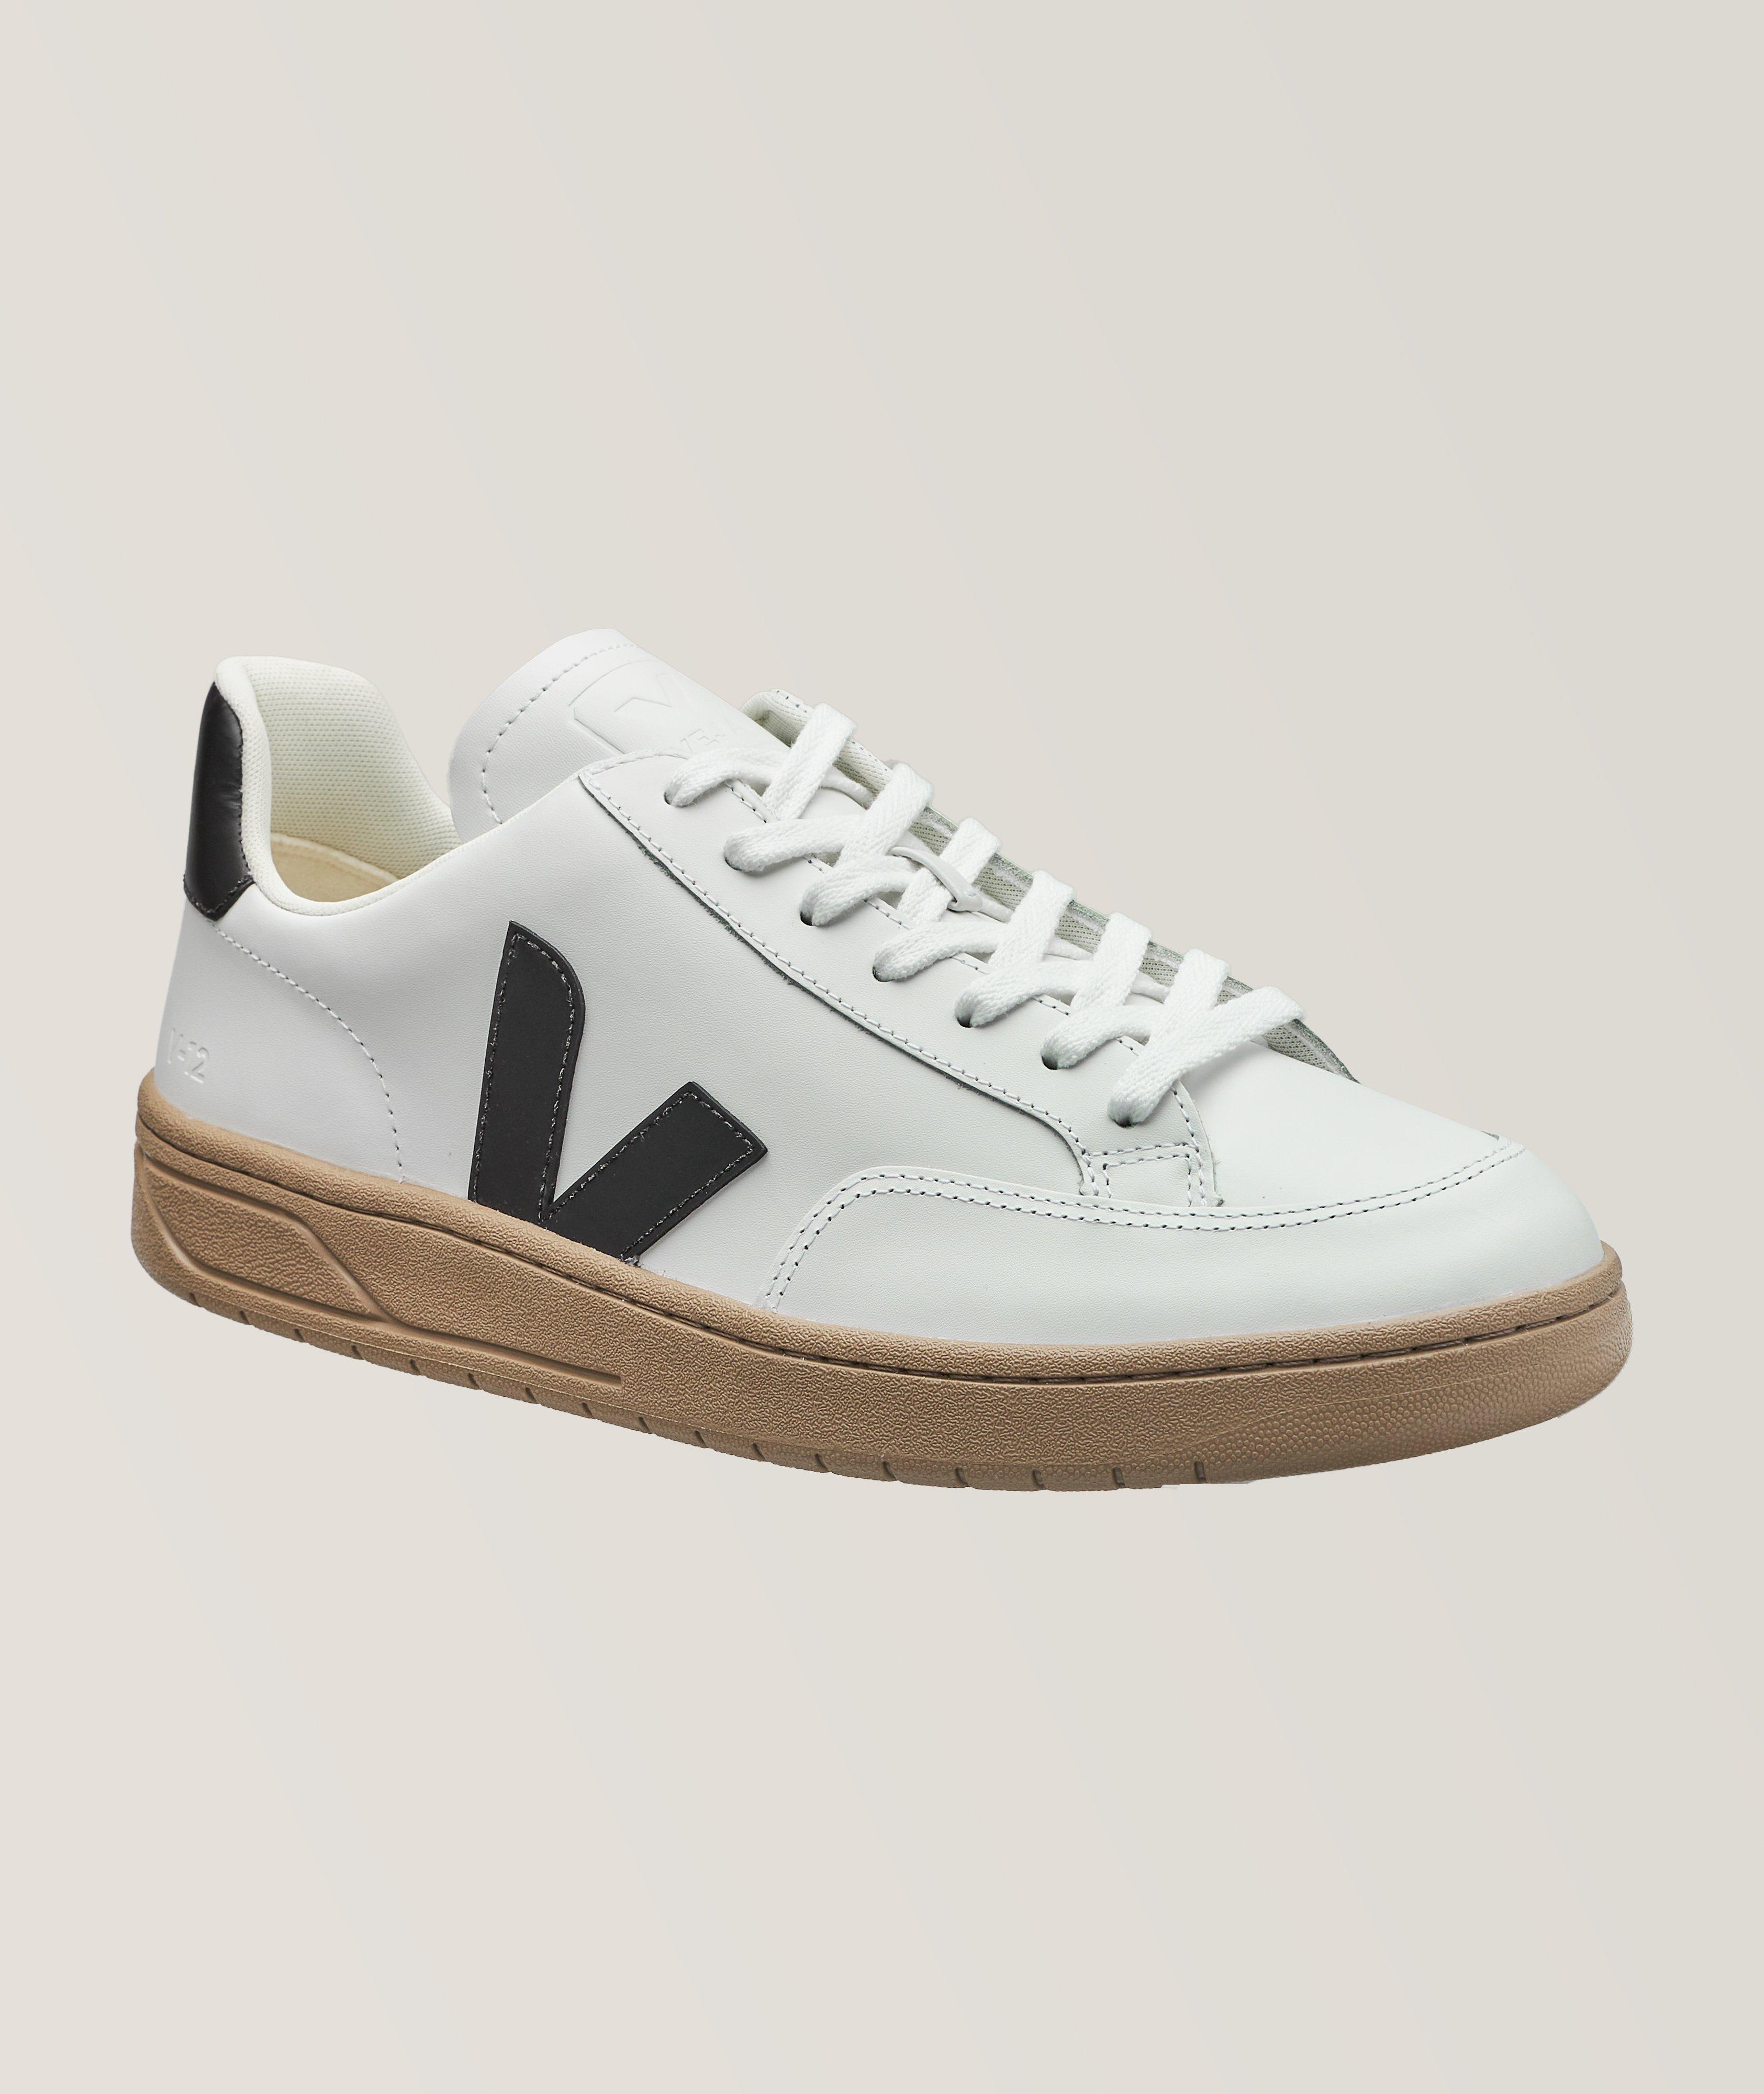 V-12 Leather Sneakers image 0